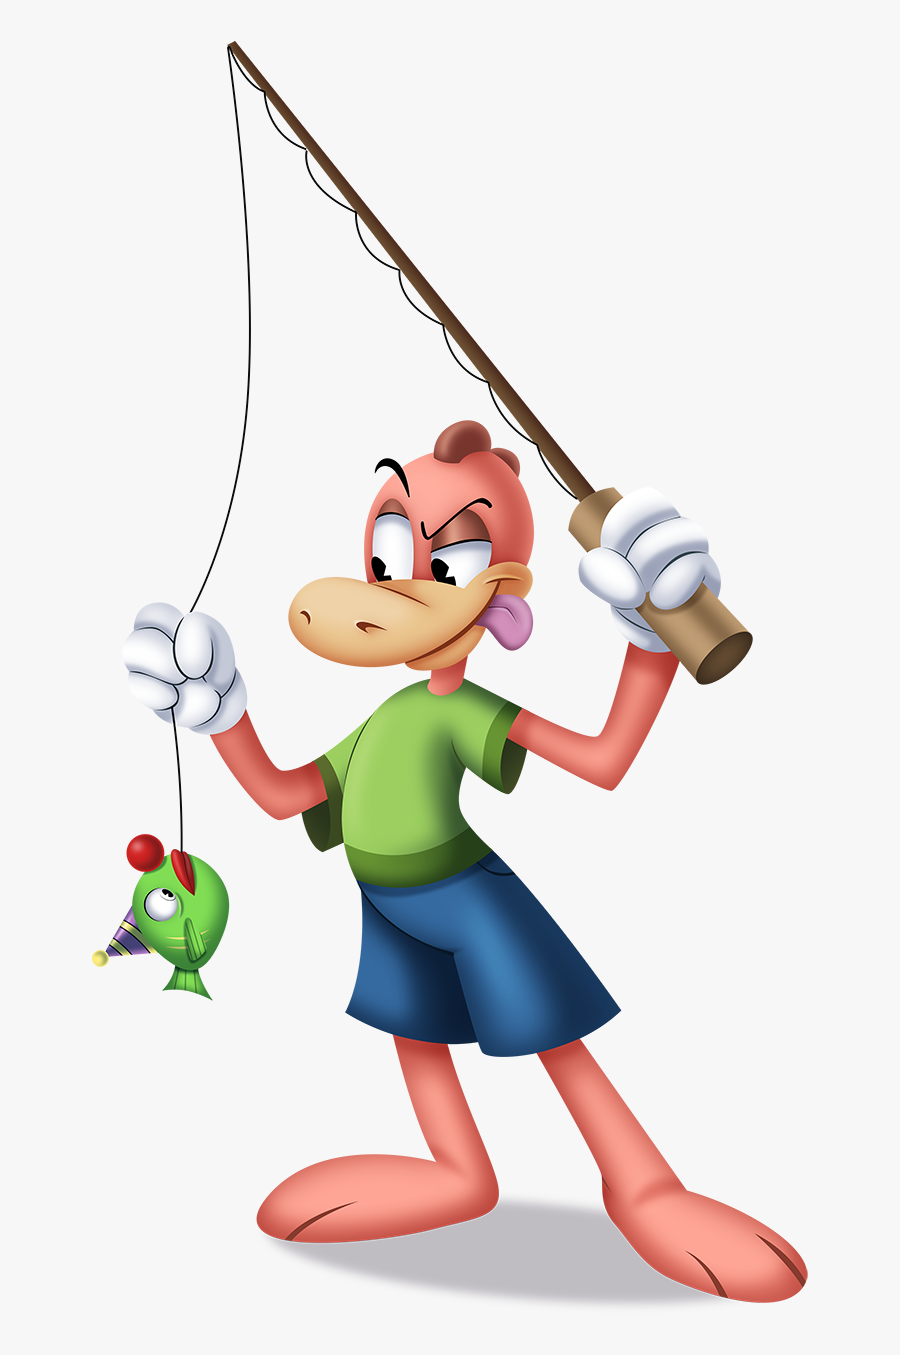 Fishing Rod Toontown Clipart , Png Download - Transparent Background Cartoon Fishing Clipart, Transparent Clipart